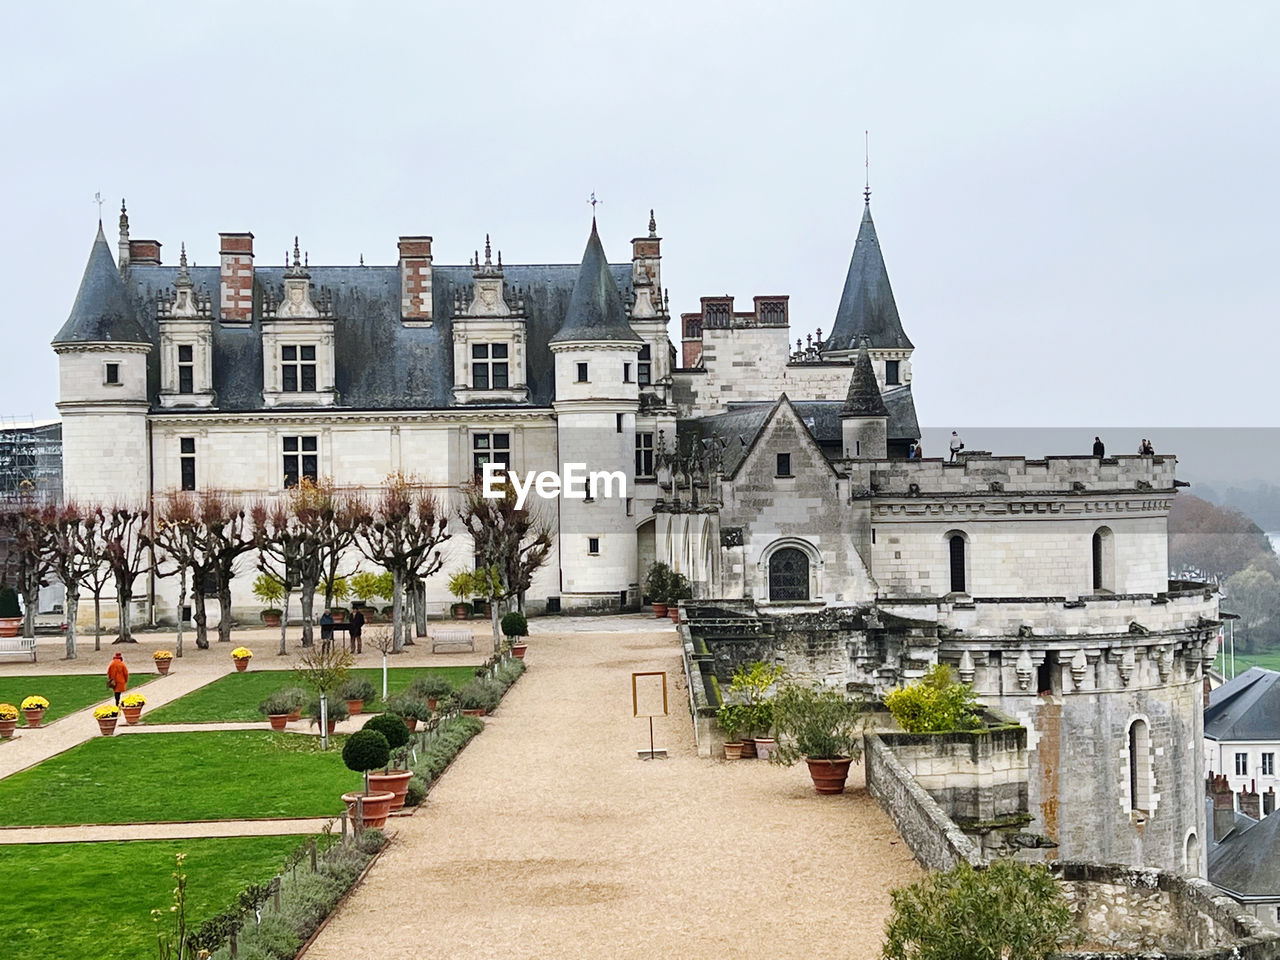 architecture, building exterior, built structure, building, château, town, sky, history, travel destinations, the past, nature, castle, city, travel, tourism, estate, house, residential district, plant, place of worship, grass, religion, tower, palace, outdoors, day, clear sky, old, no people, water, town square, medieval